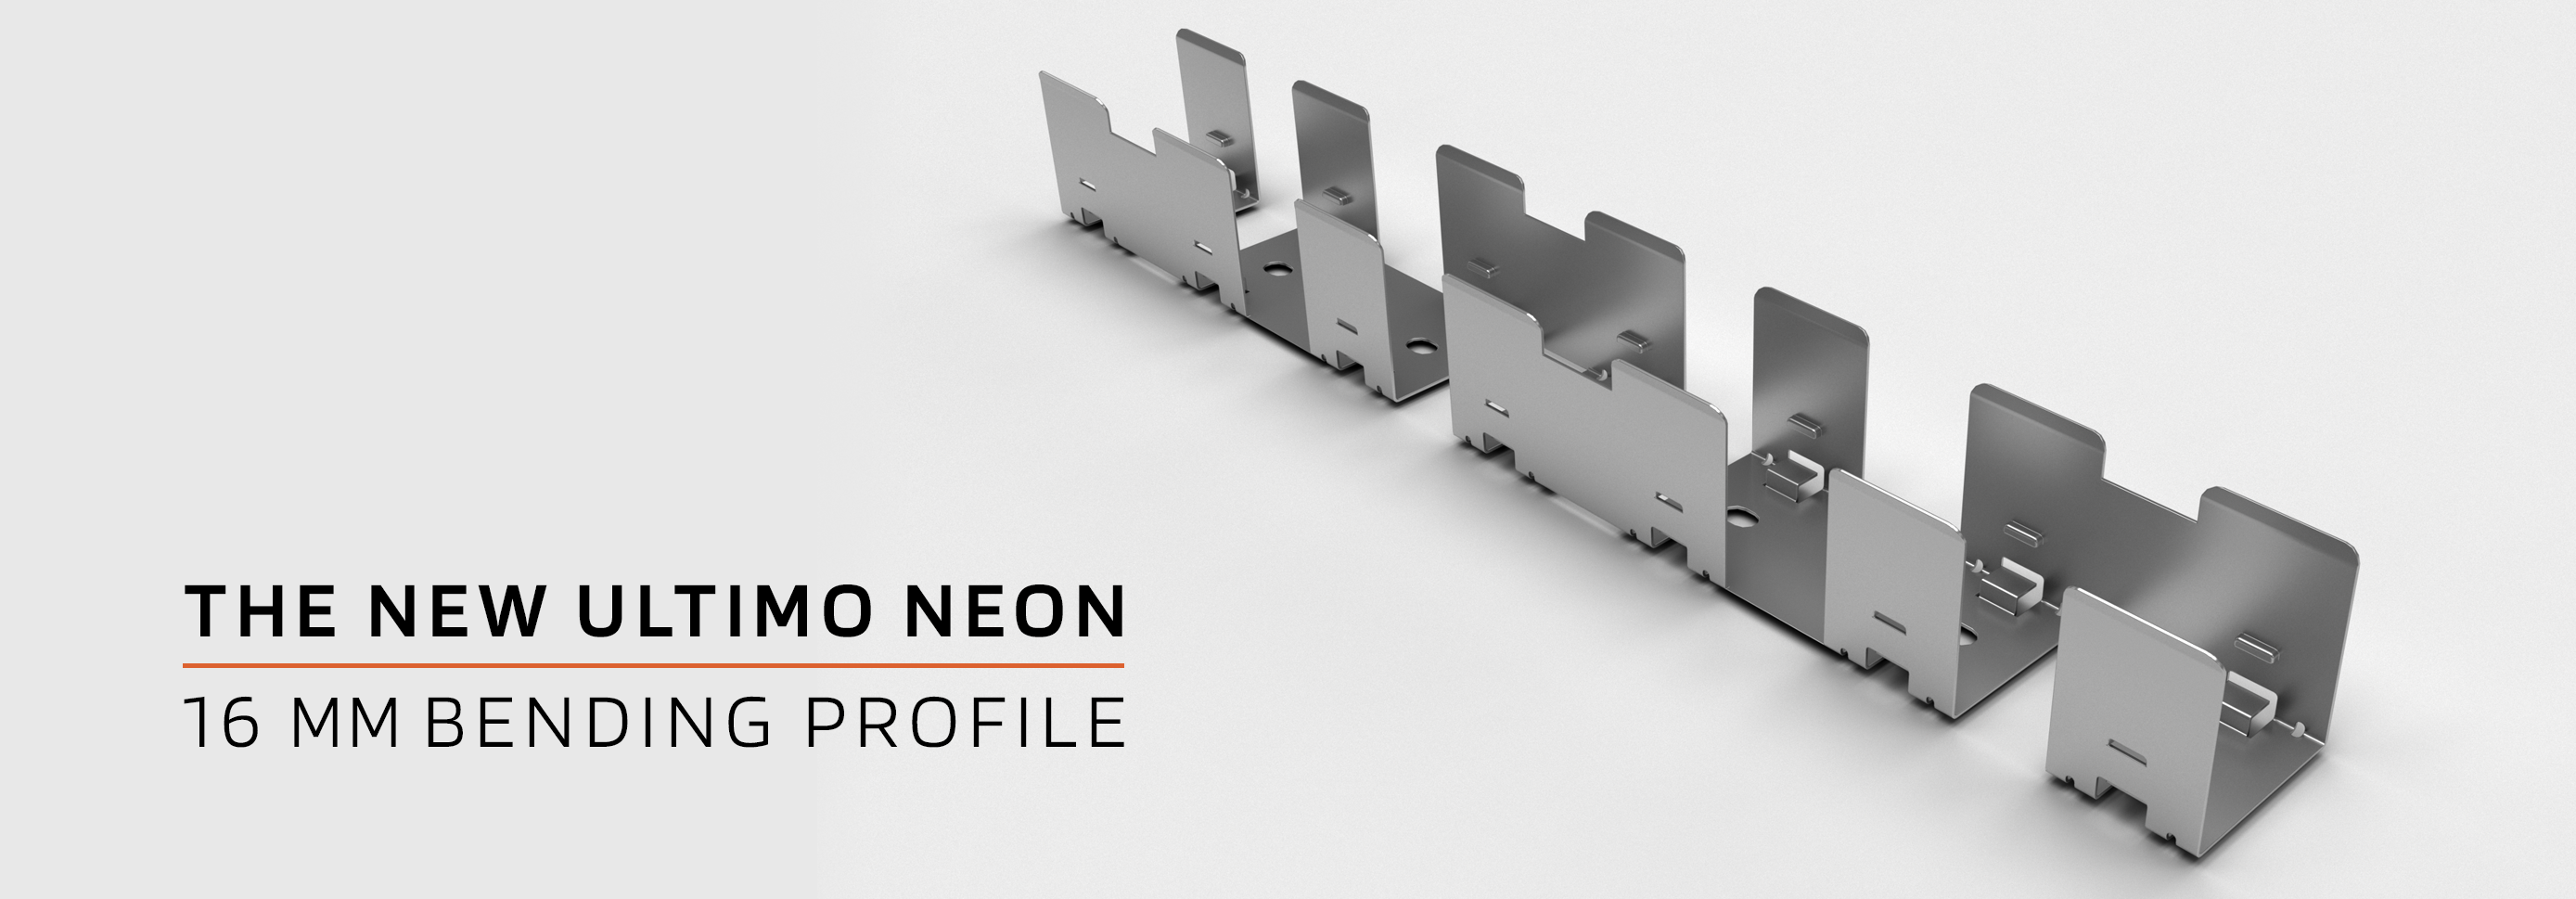 The New Ultimo Neon 16 MM Bending Profile